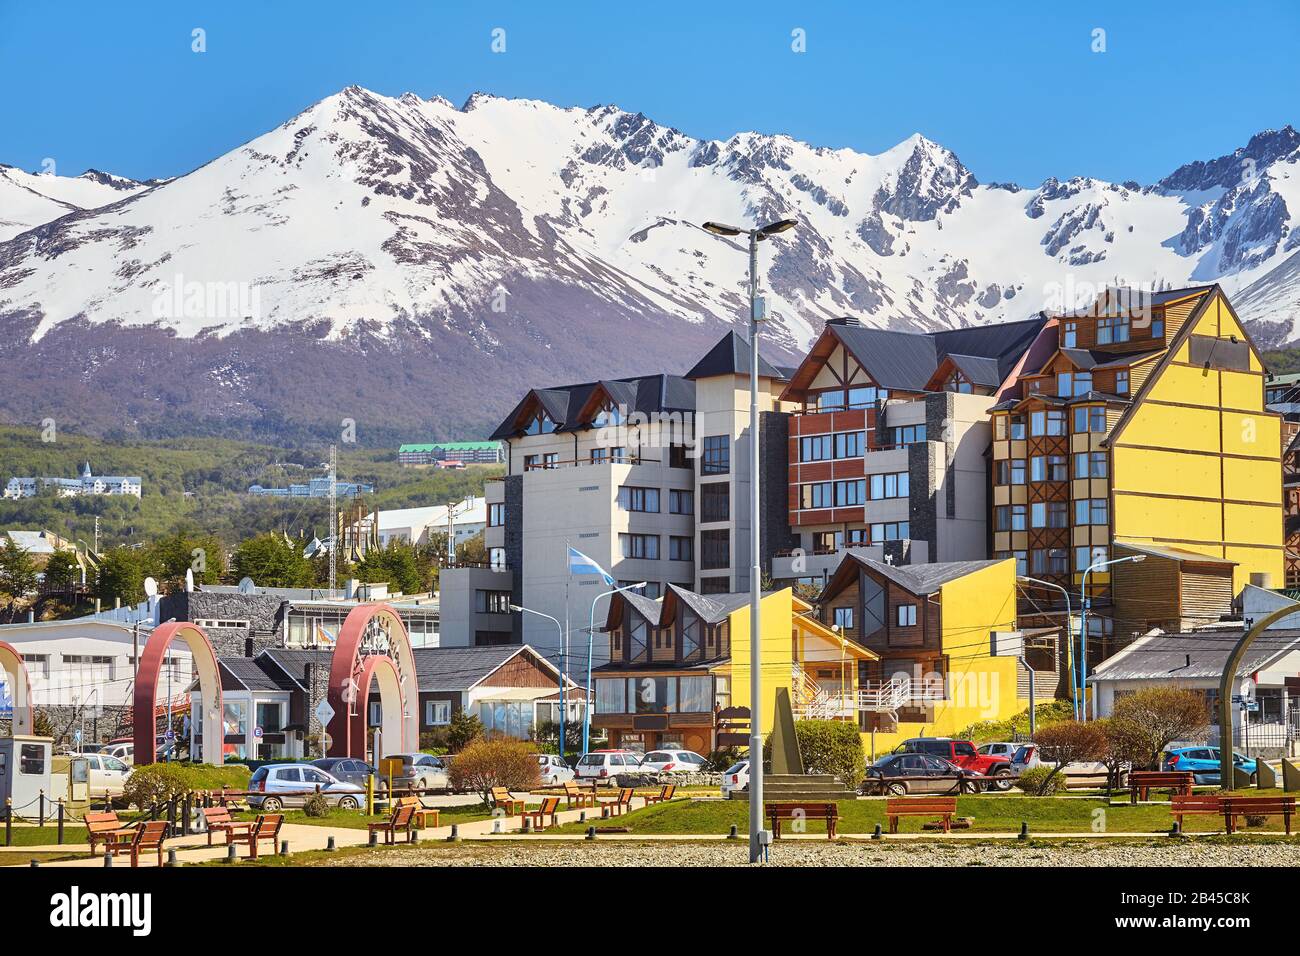 Ushuaia, the capital of Tierra del Fuego Province, the southernmost city in the world, Argentina. Stock Photo